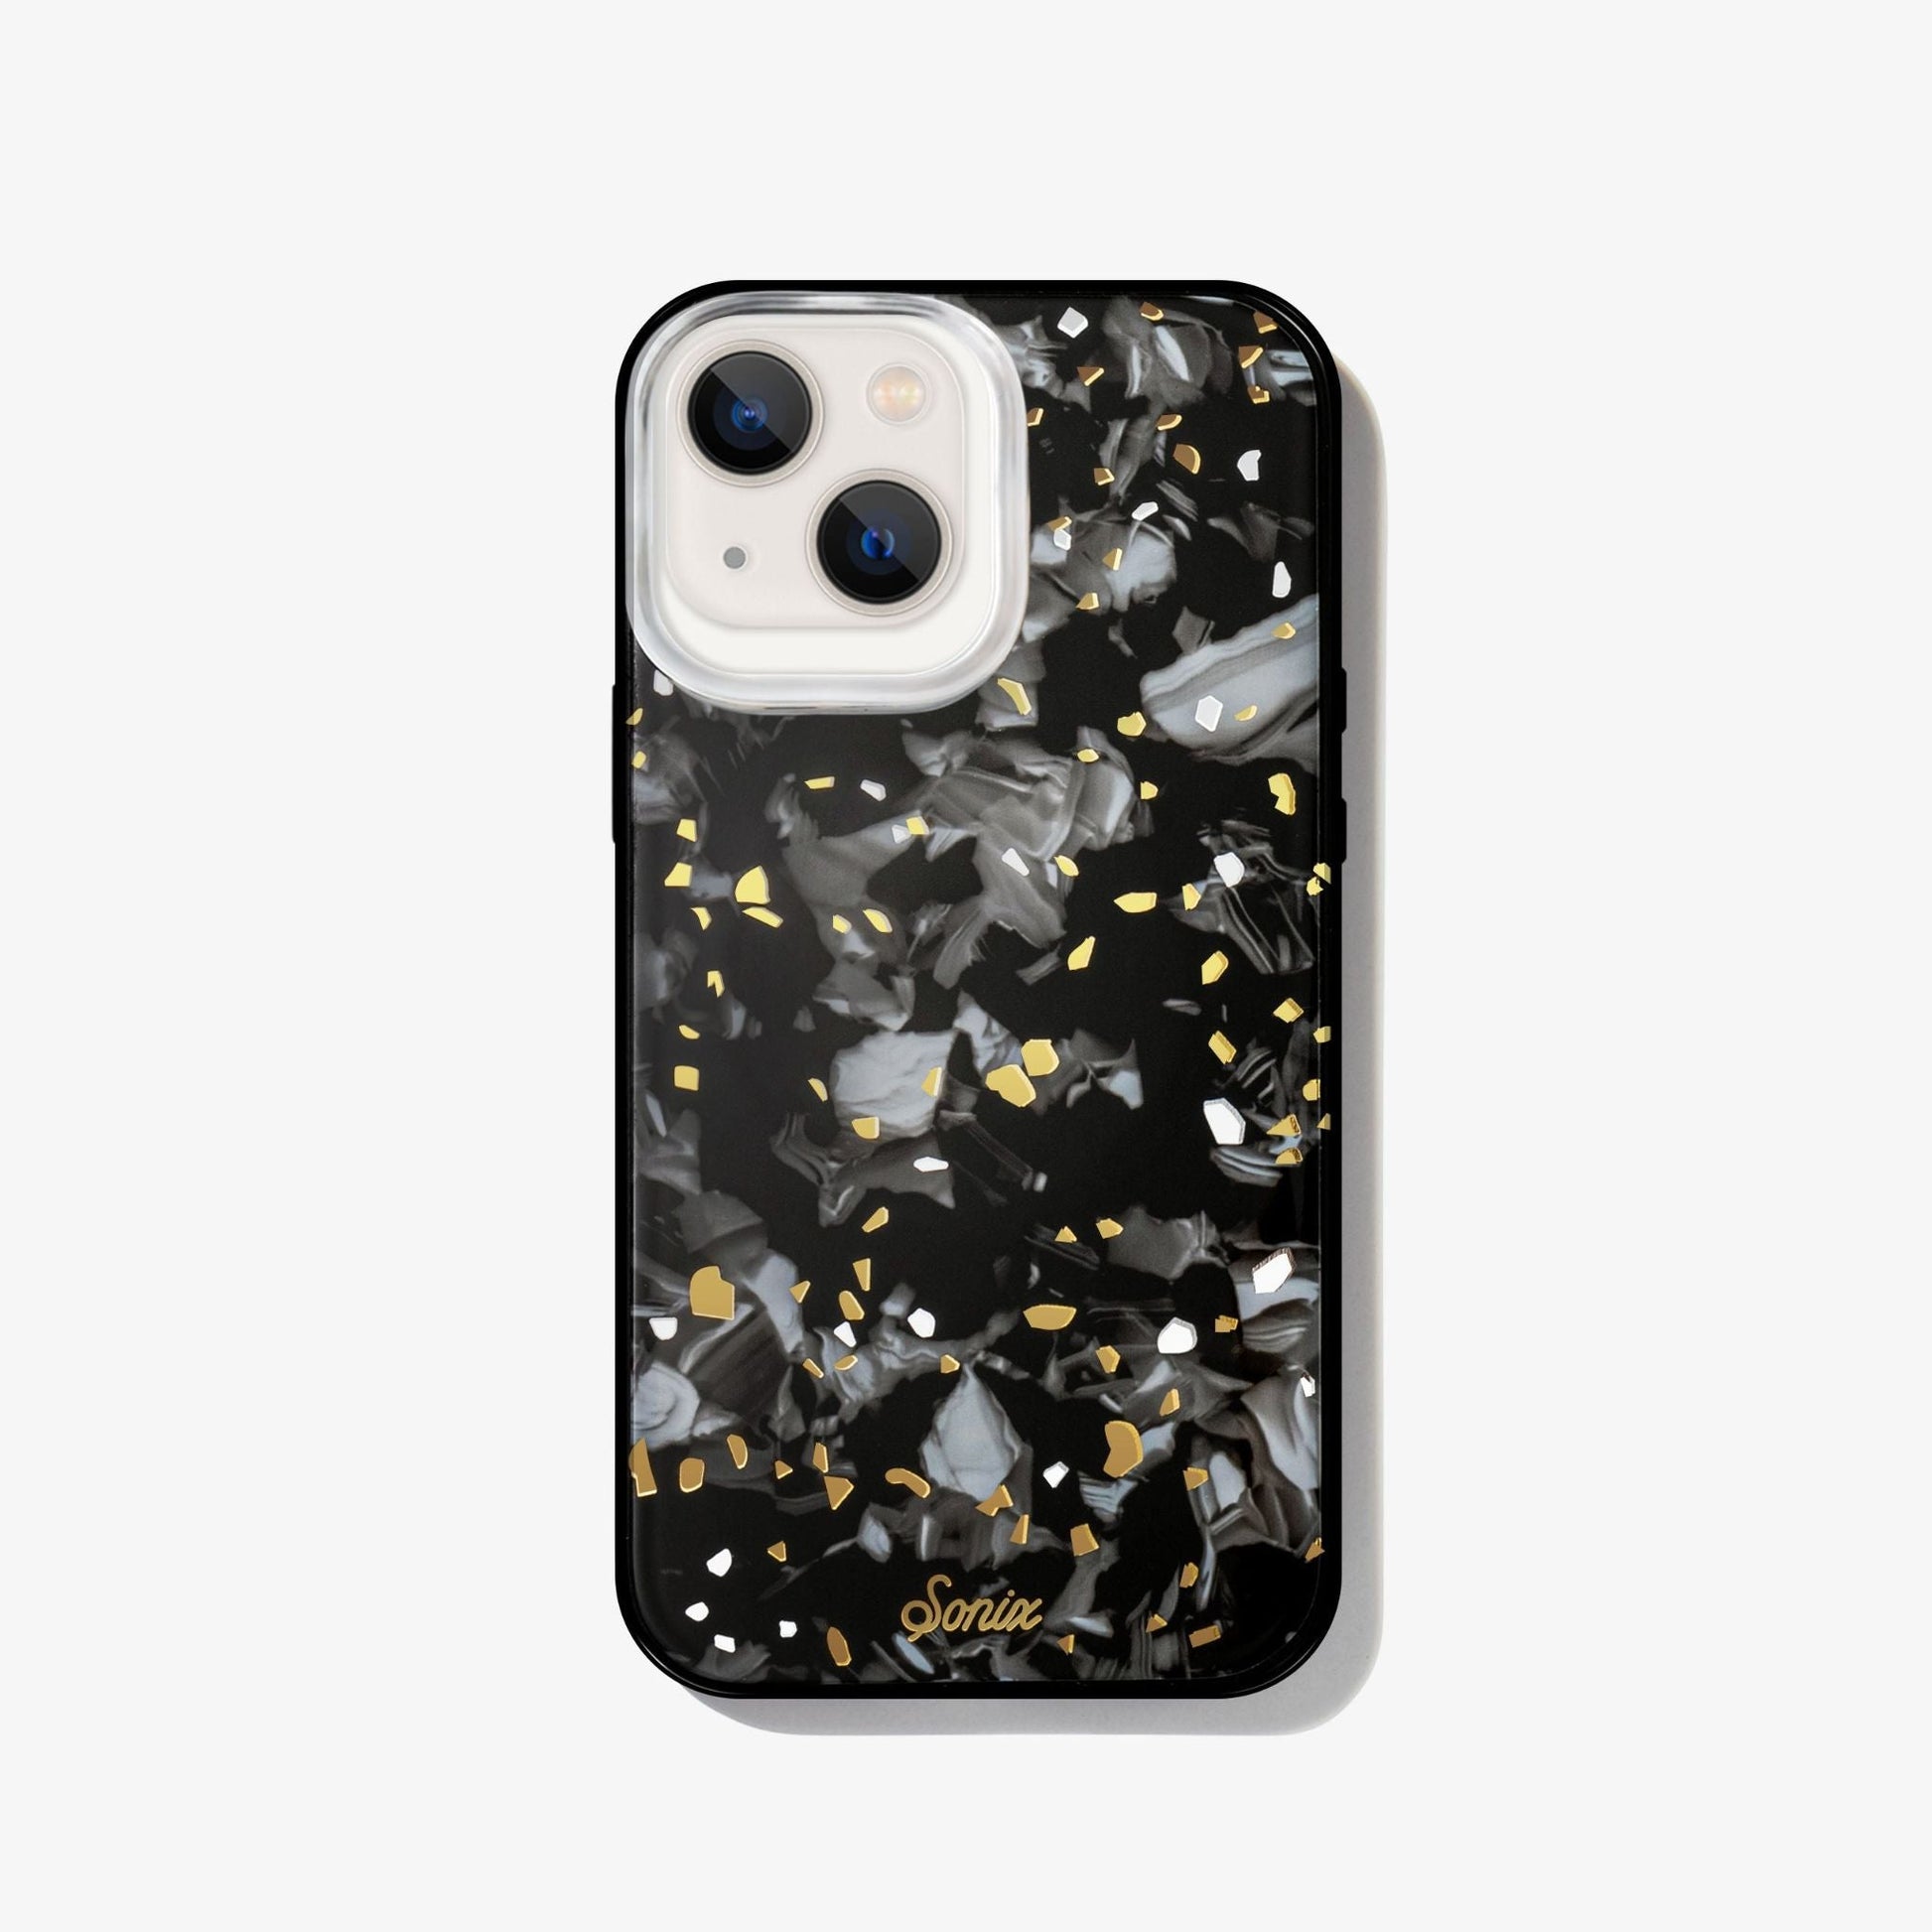 Dark galaxy rocks with highlights of gold and white on a black base.case shown on an iphone 13